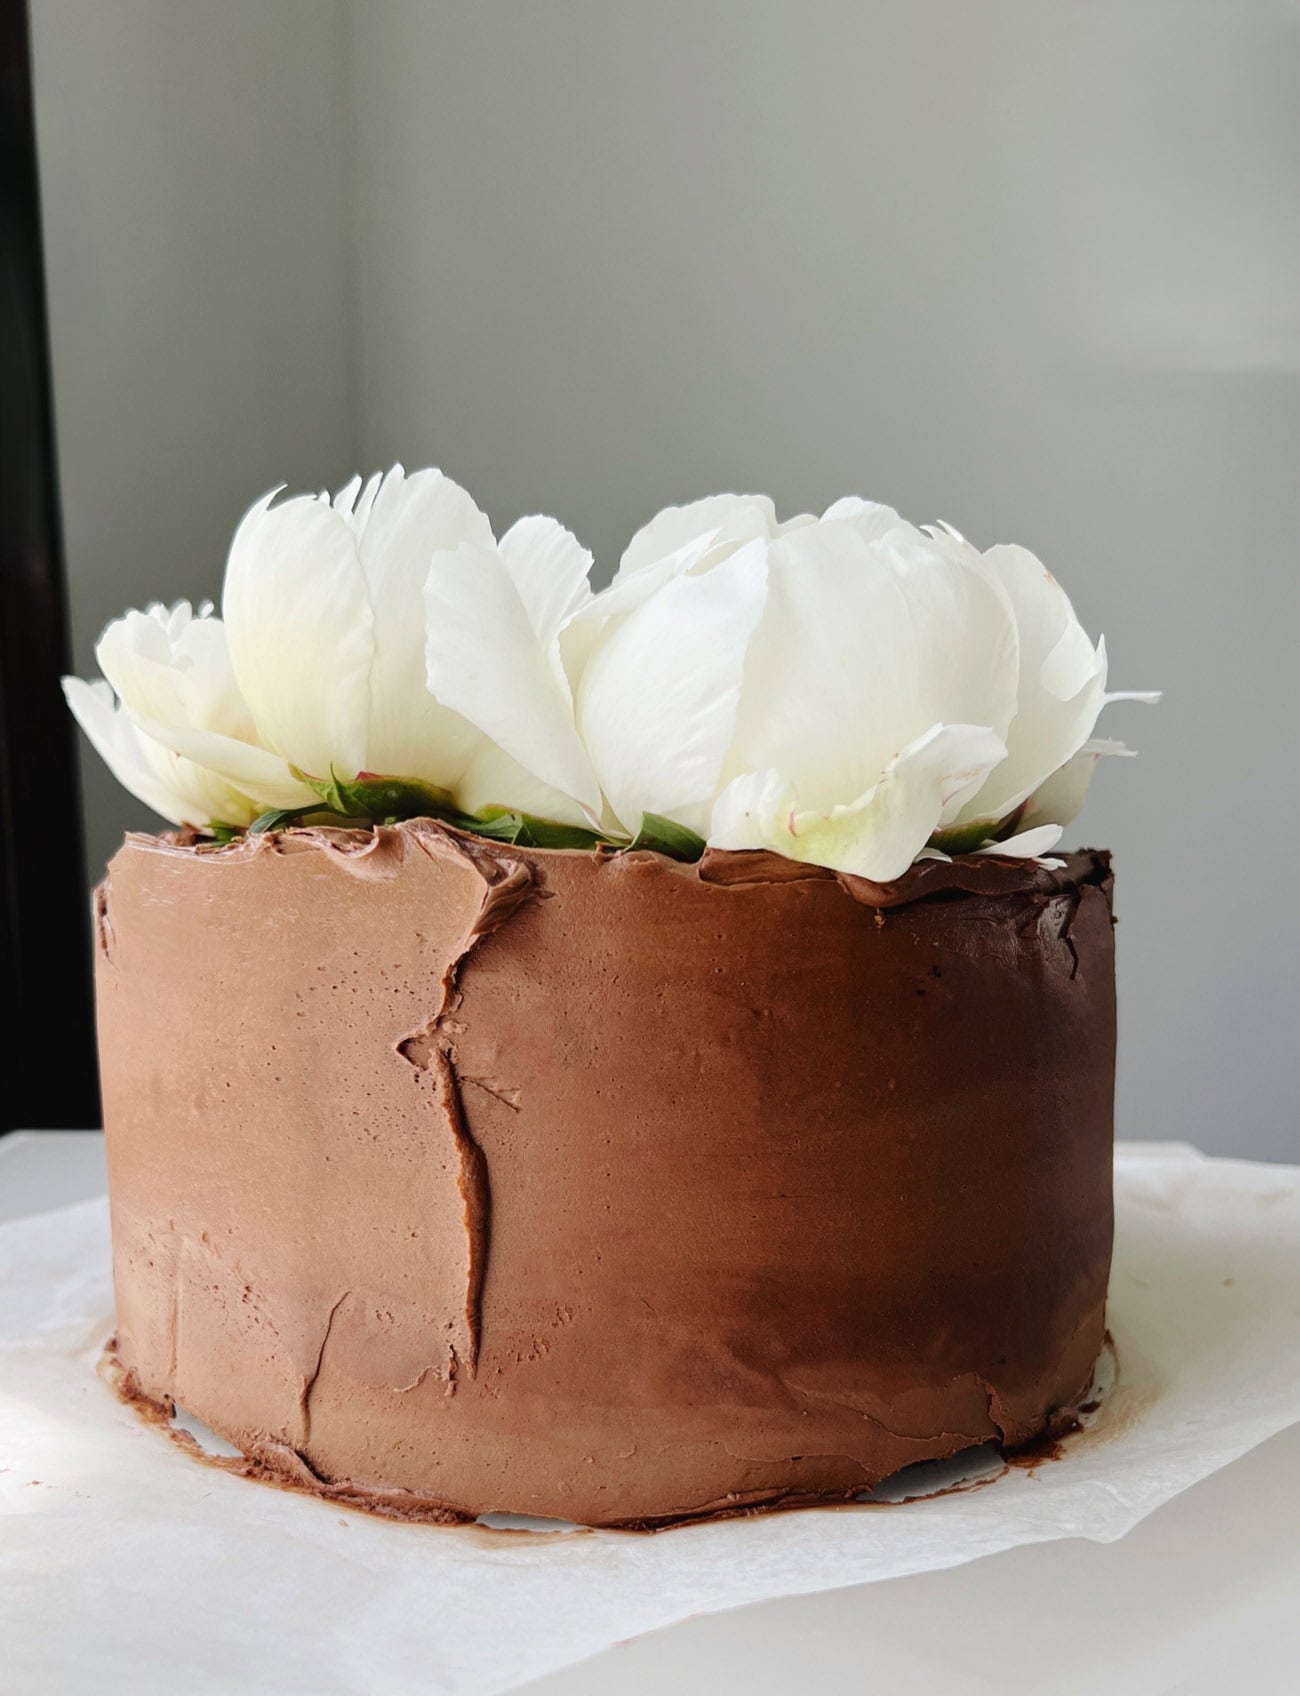 chocolate cake with peonies for decoration